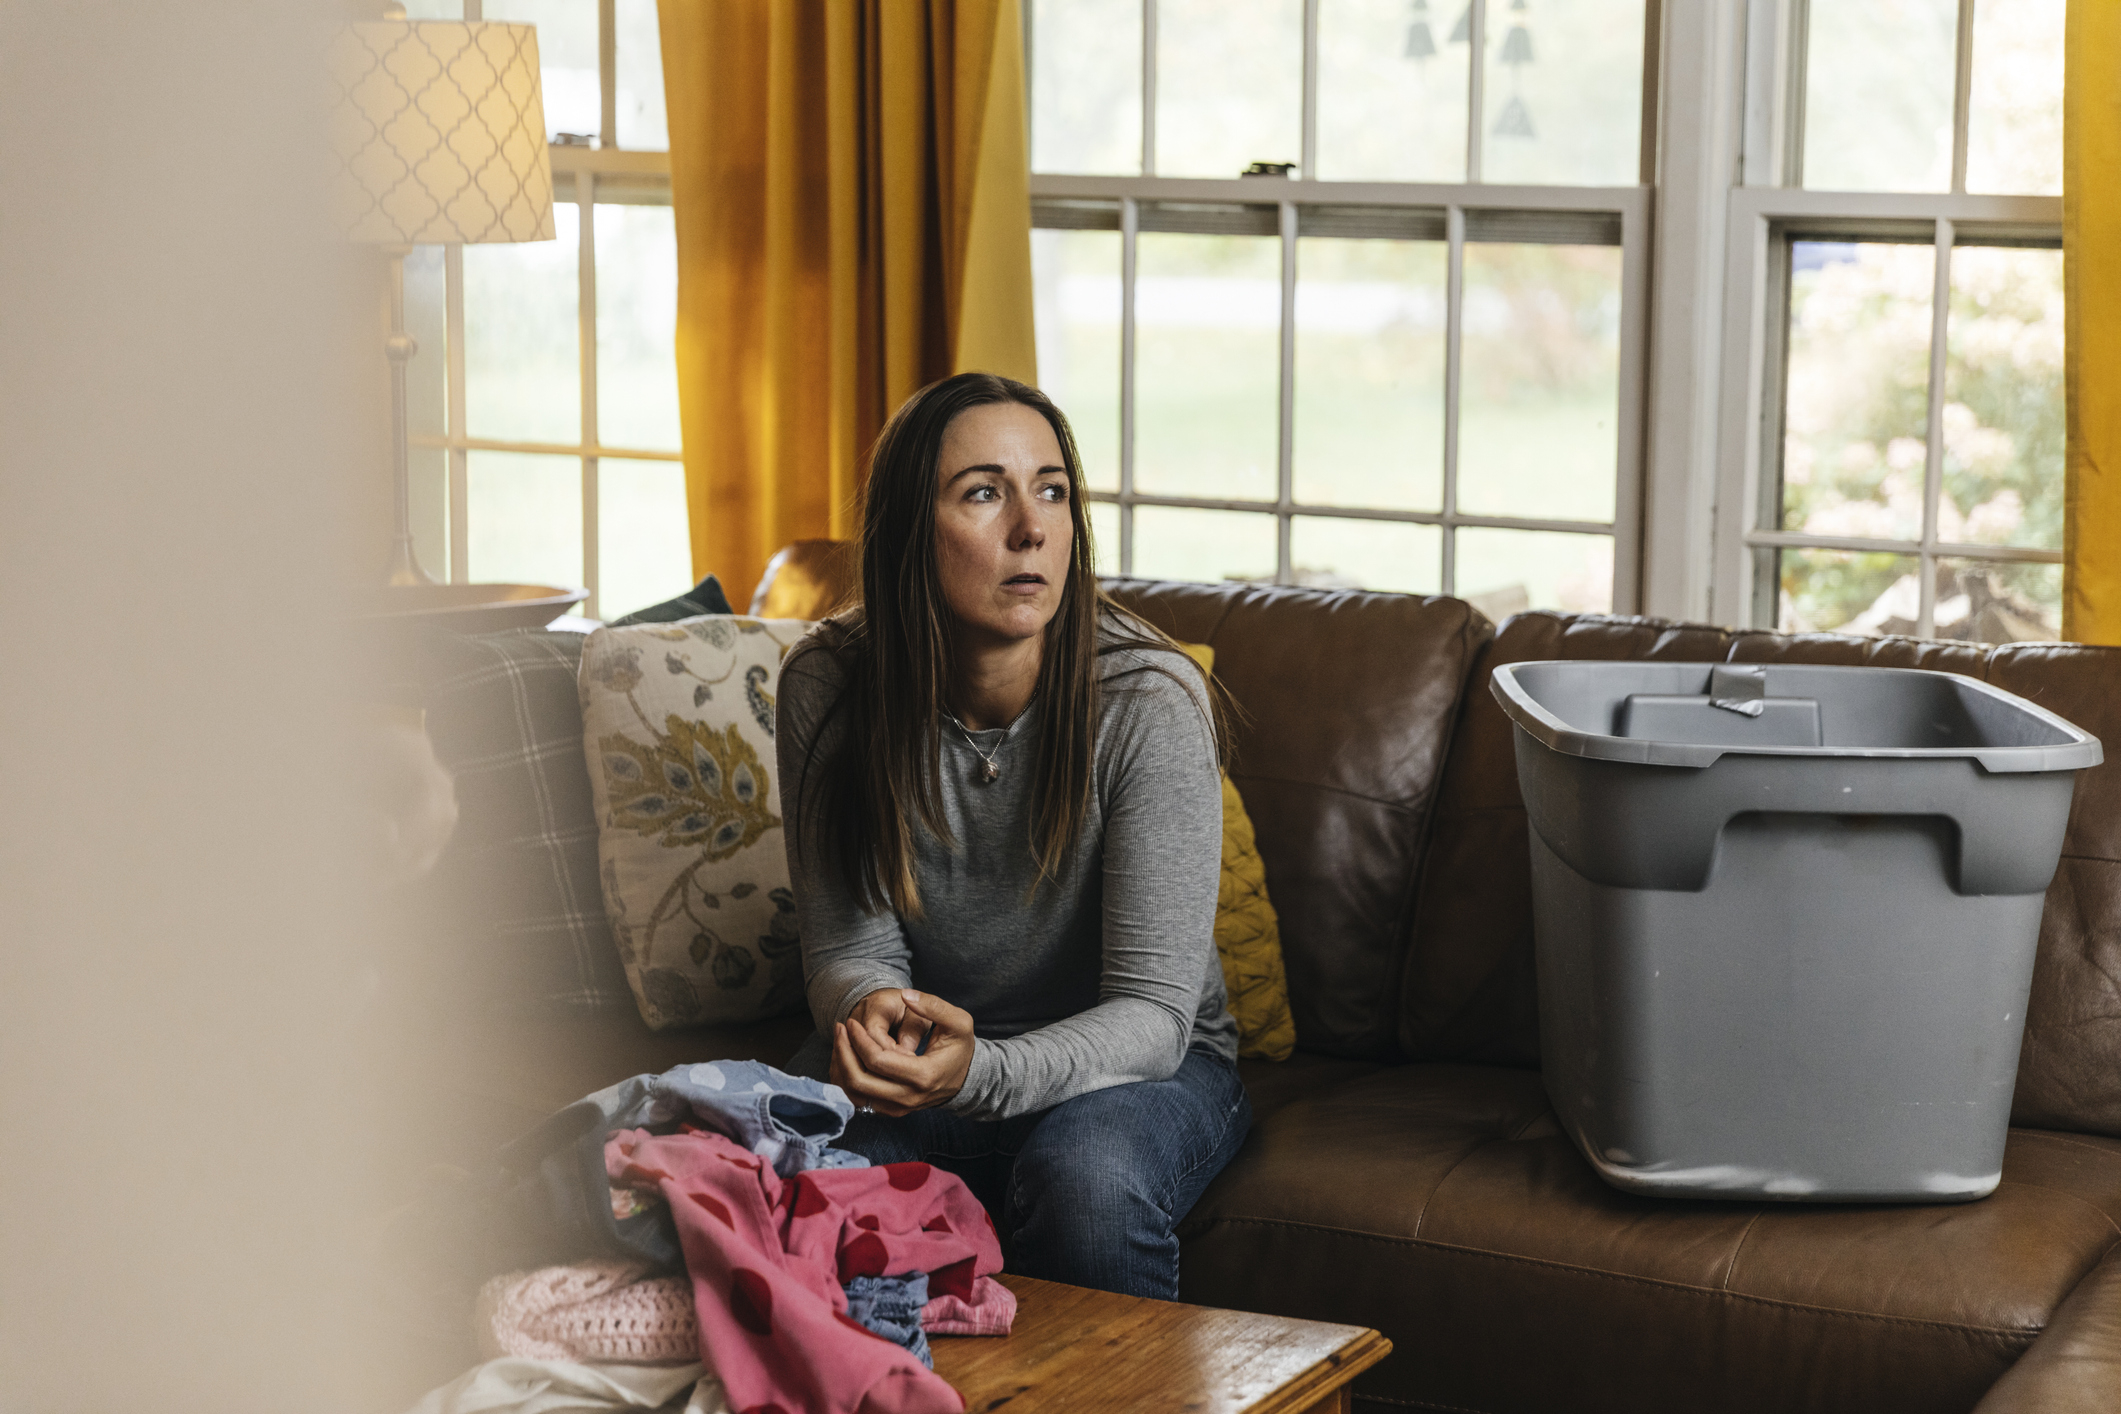 A woman is sitting in the living room next to a pile of clothes looking distraught